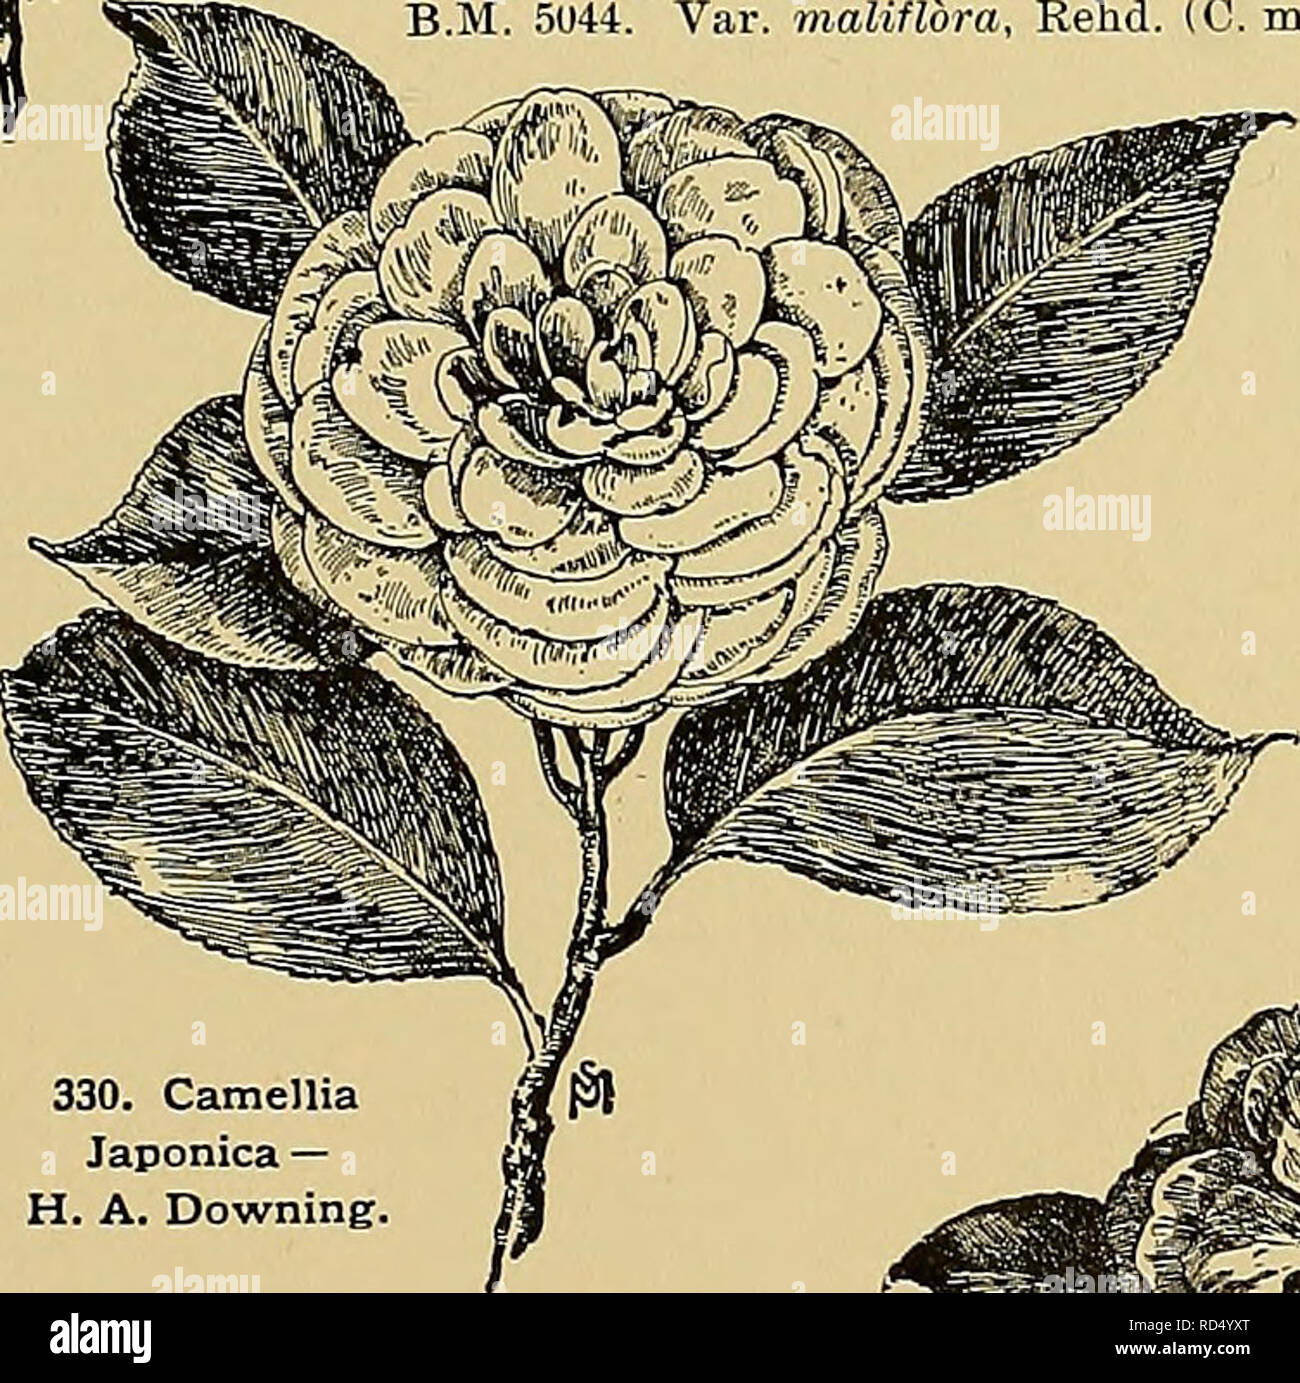 . Cyclopedia of American horticulture, comprising suggestions for cultivation of horticultural plants, descriptions of the species of fruits, vegetables, flowers, and ornamental plants sold in the United States and Canada, together with geographical and biographical sketches. Gardening. 339. Camellia Japonica — Lucida. CAMELLIA (after George Joseph Kamel or Camellus, a Moravian Jesuit, who traveled in Asia in the seventeenth century). Ternstrcemidcece. Evergreen trees or shrubs: Ivs. alternate, short-petioled, serrate: fls. large, axillary or terminal, usually solitary, white or red ; sepals a Stock Photo